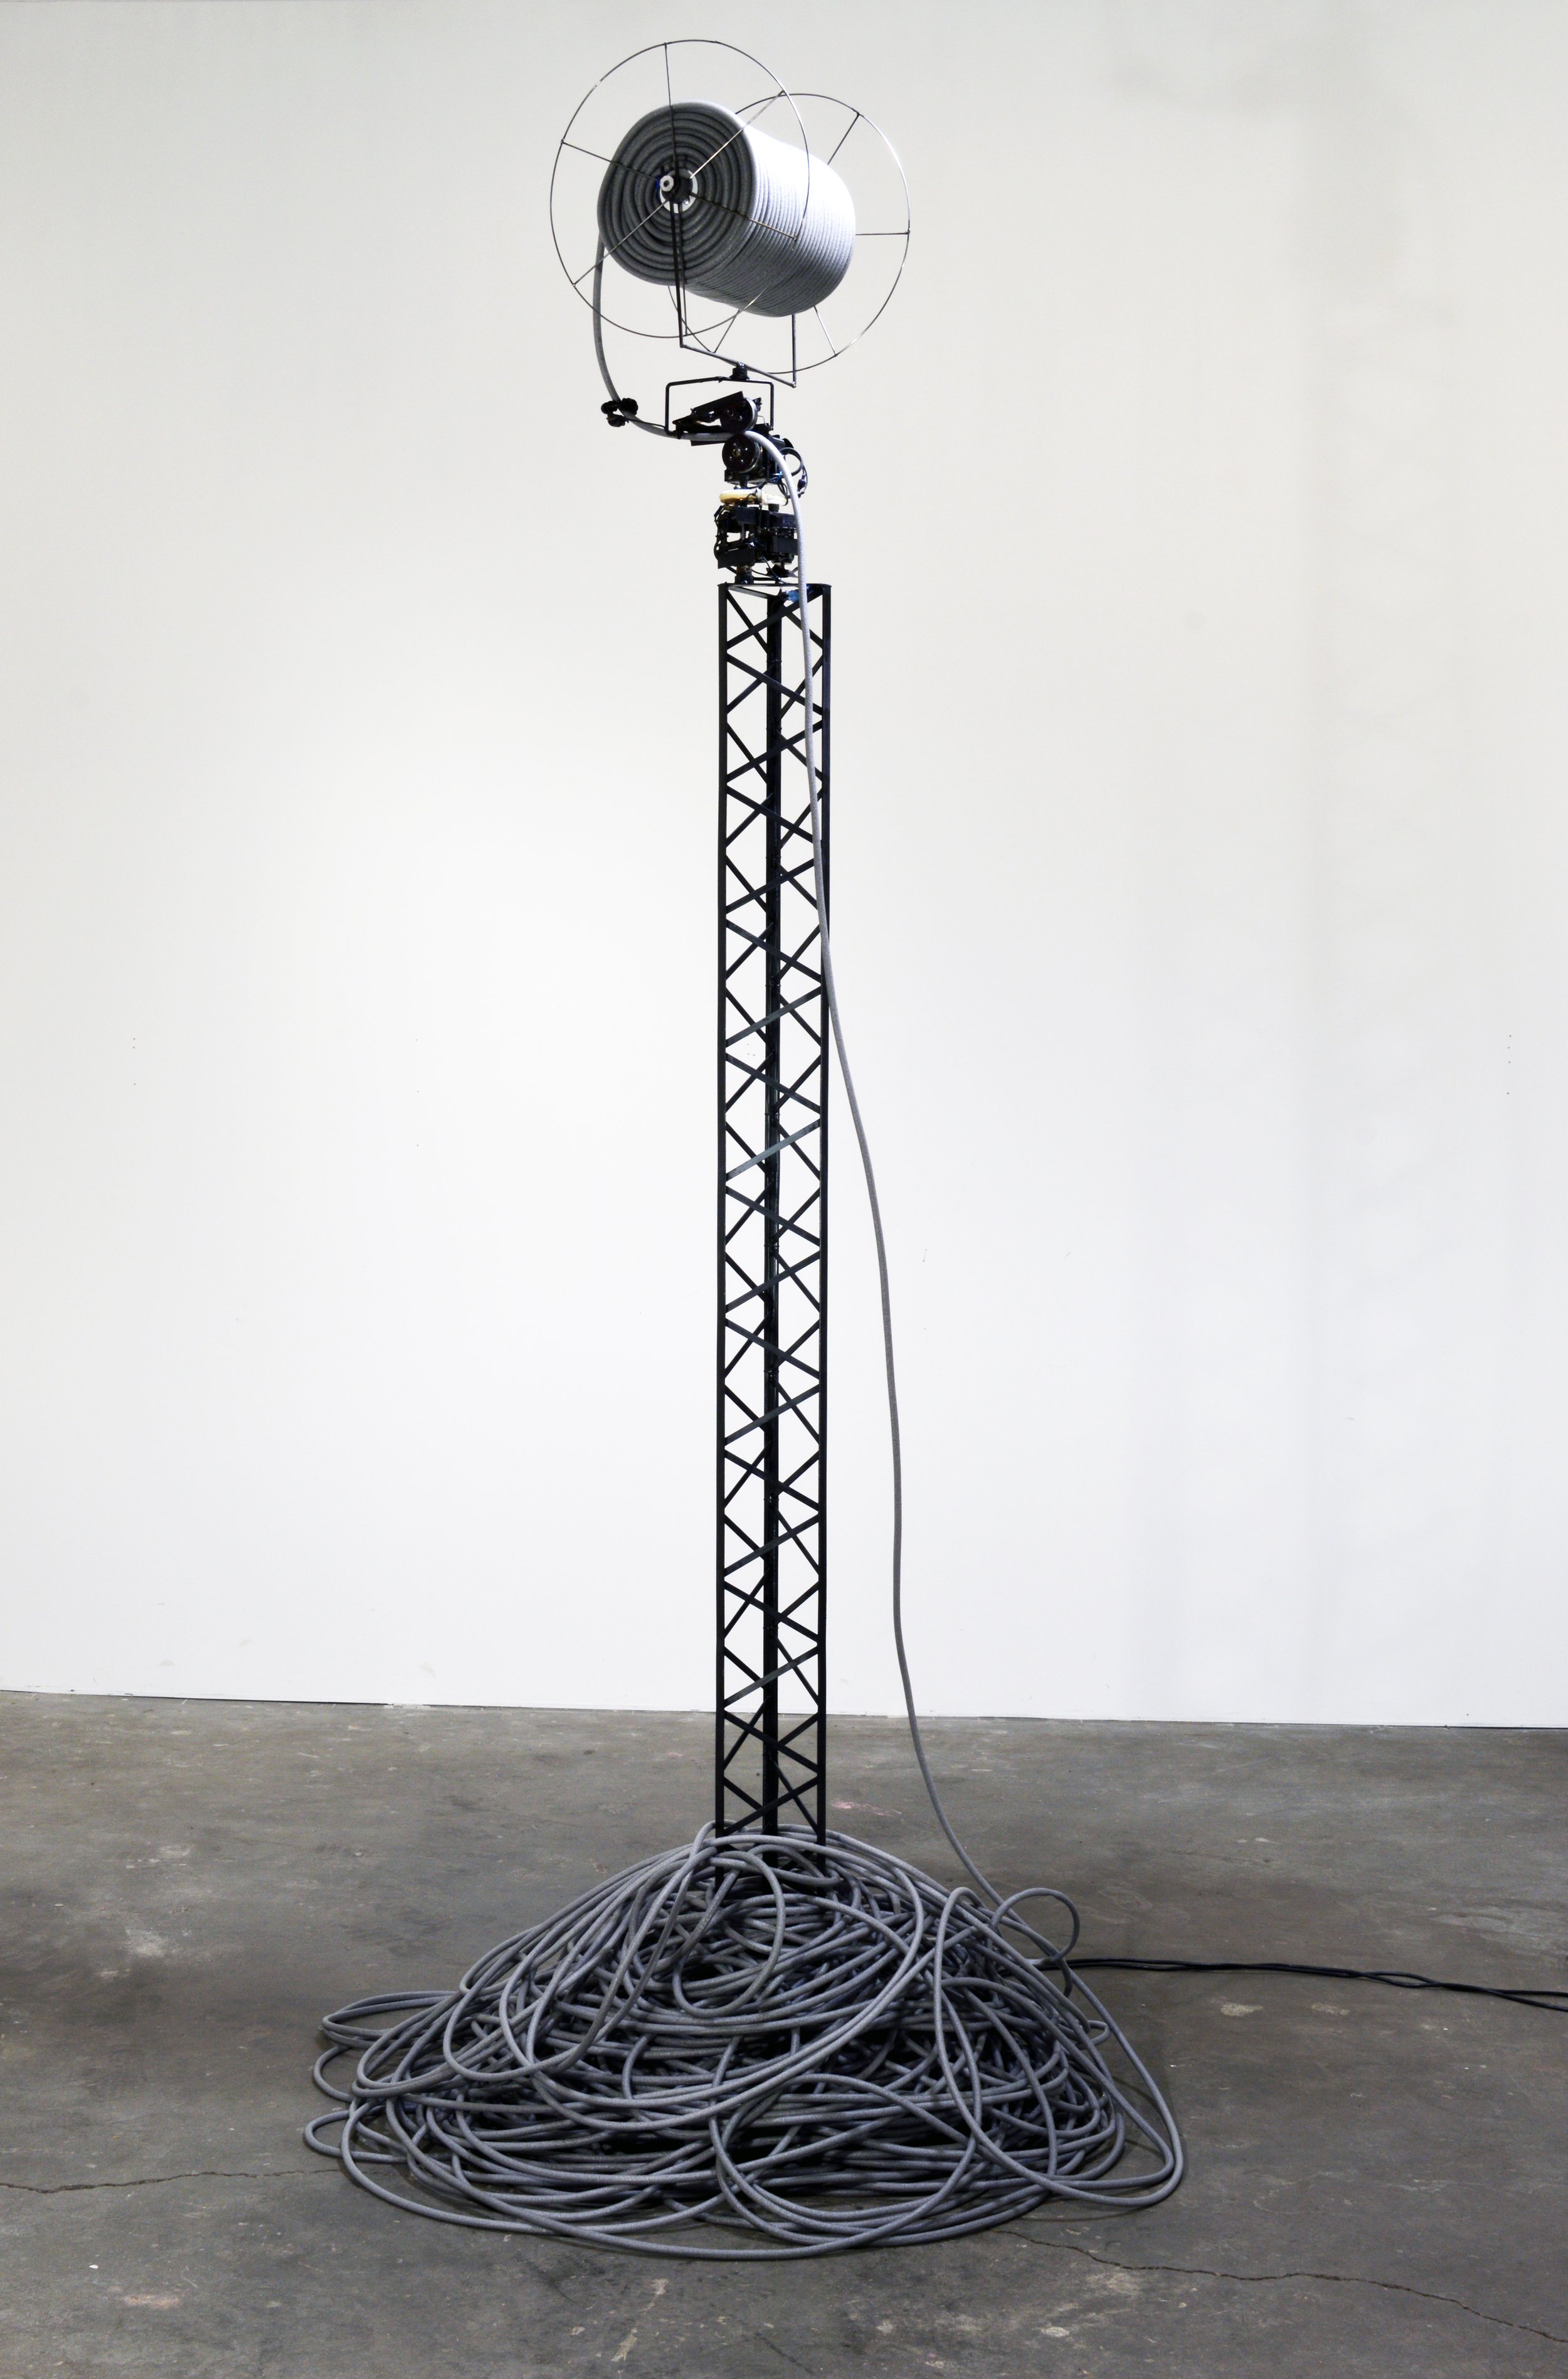  Host (2018), steel with motor, backer rod, foot pedal and timer, freestanding kinetic sculpture: 15 feet tall, variable 6 foot diameter pile unspools at base 